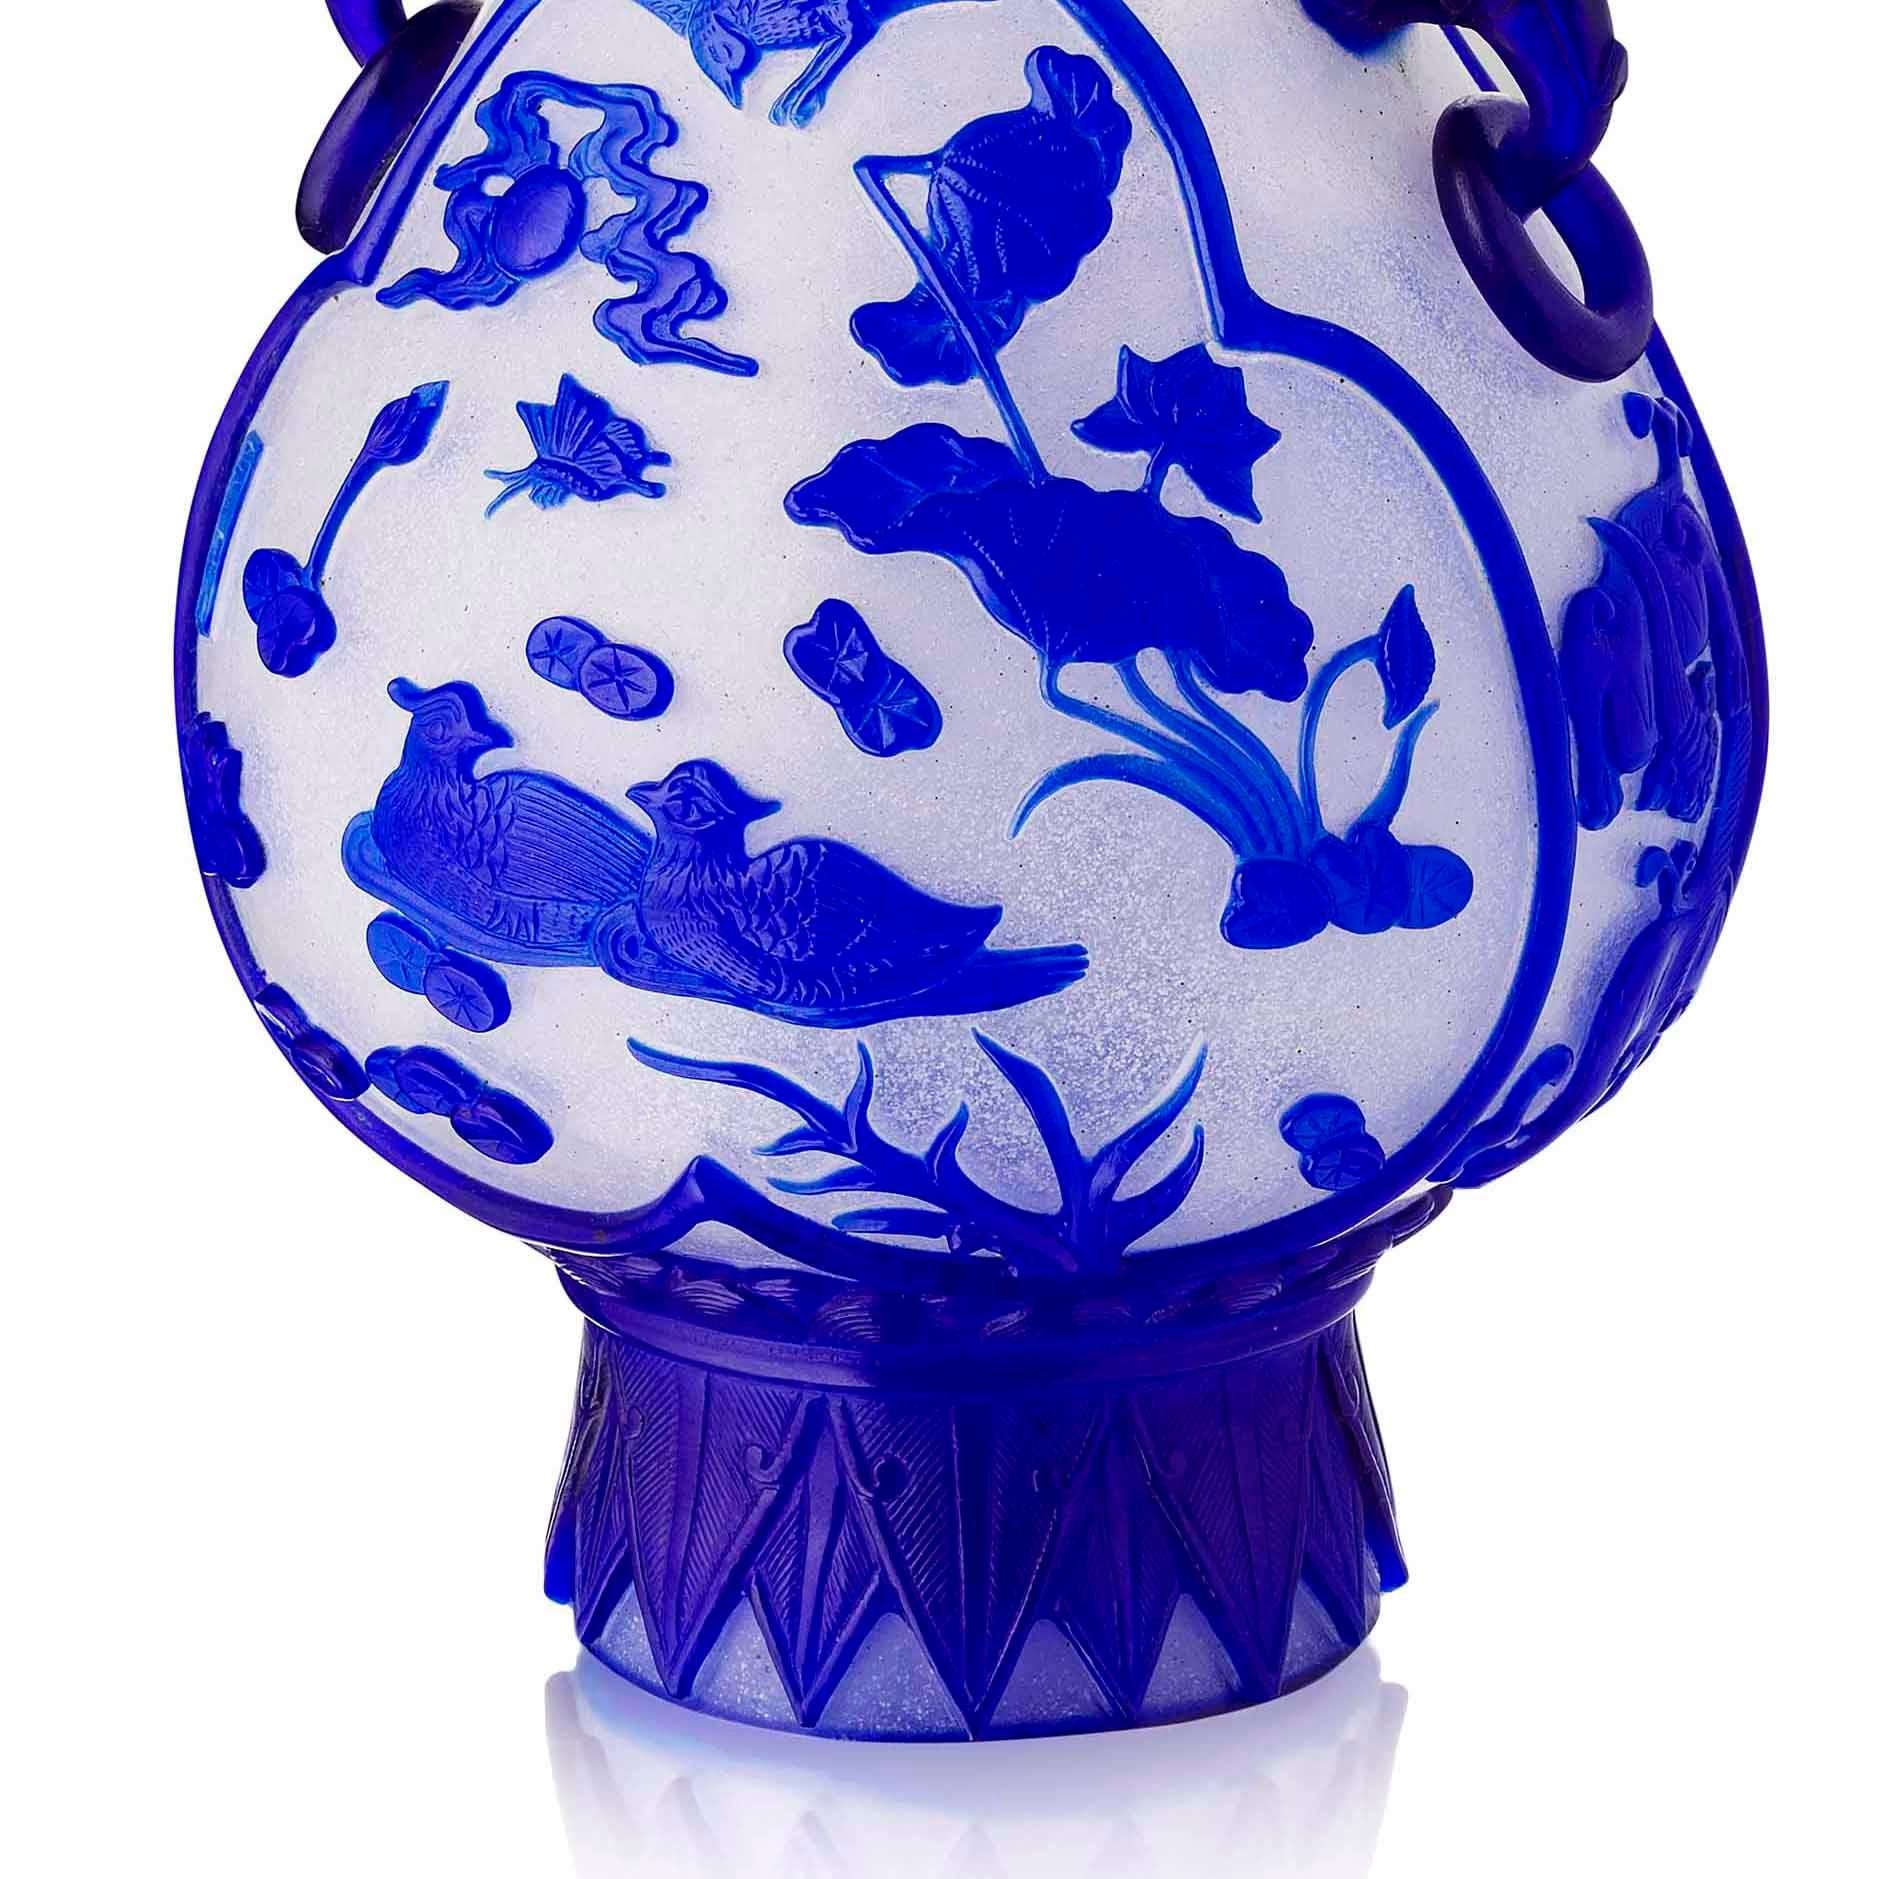 Chinese Blue Overlay Peking Glass Vase In Excellent Condition In London, by appointment only